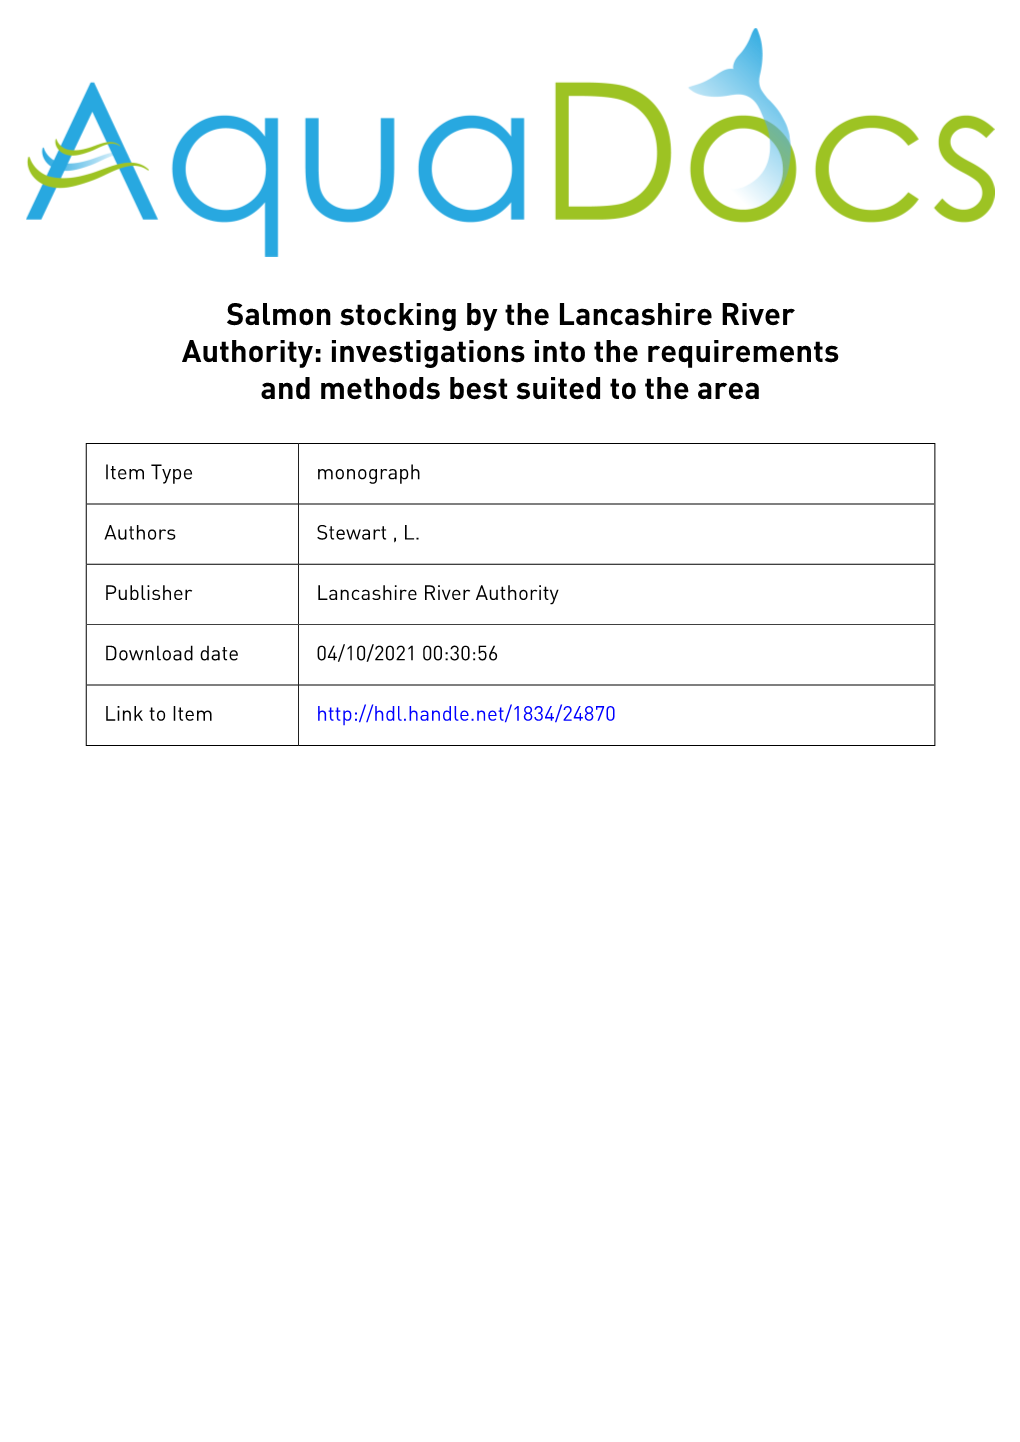 Salmon Stocking by the Lancashire River Authority: Investigations Into the Requirements and Methods Best Suited to the Area